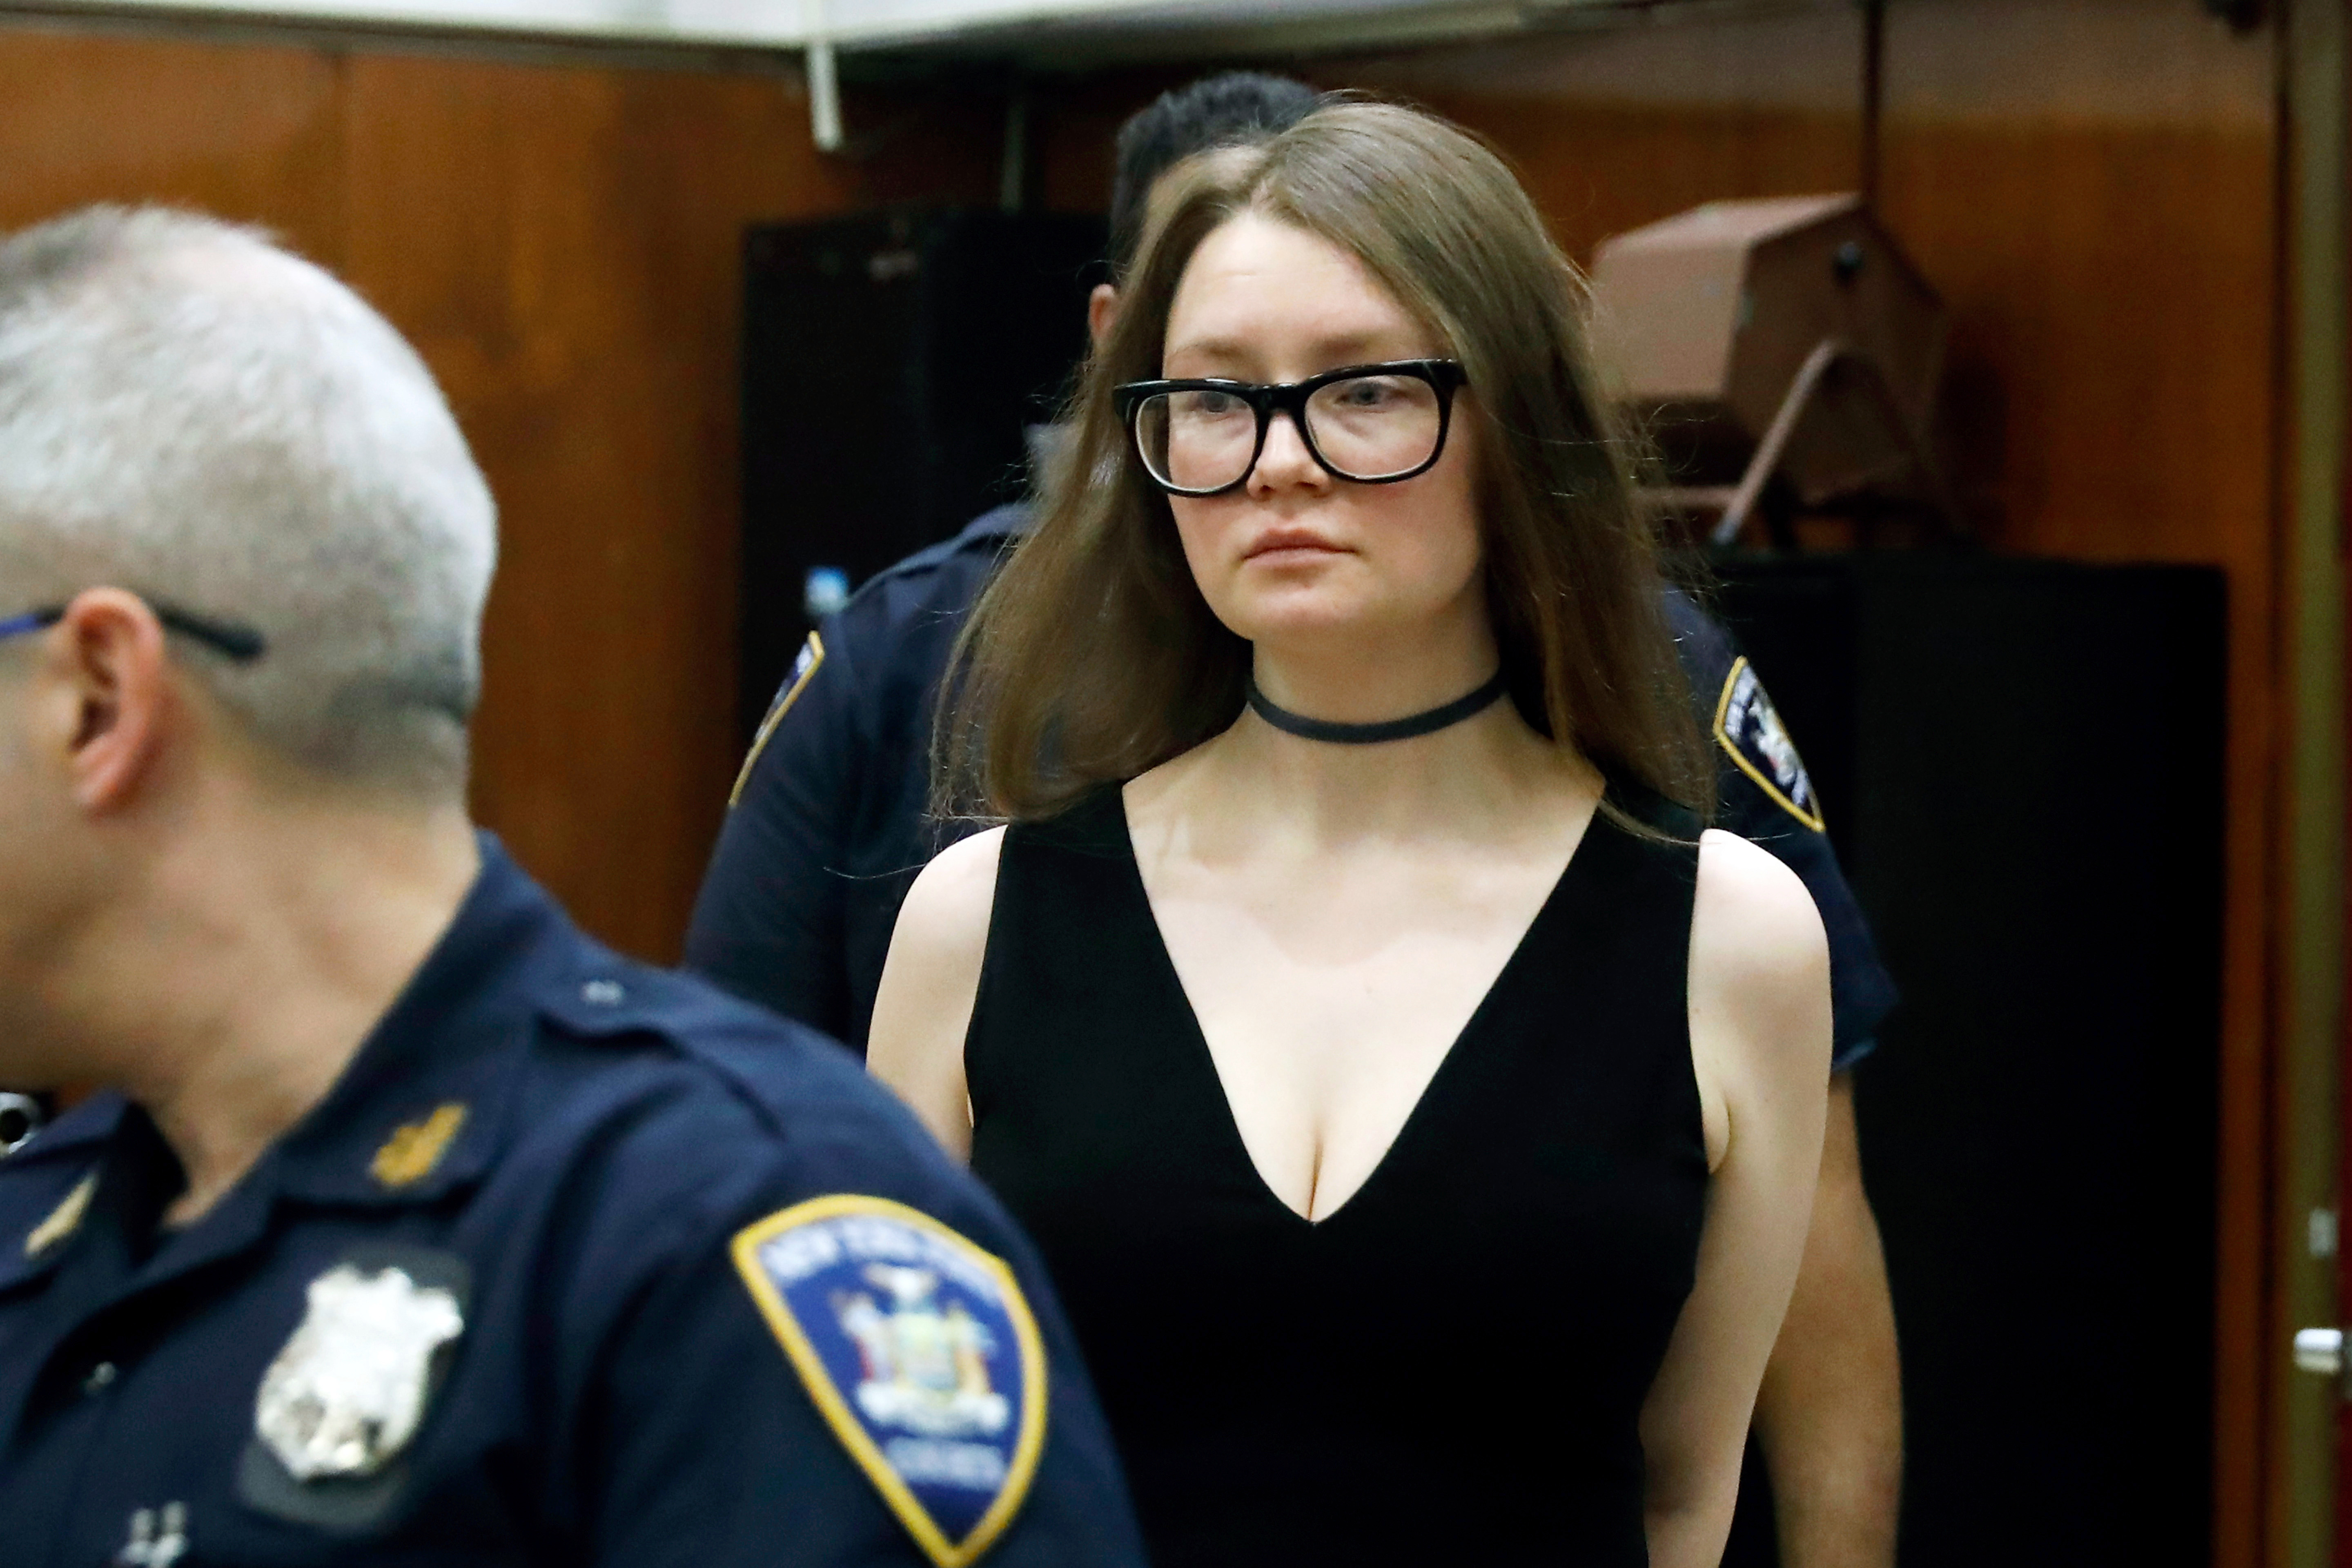 Where is anna delvey now